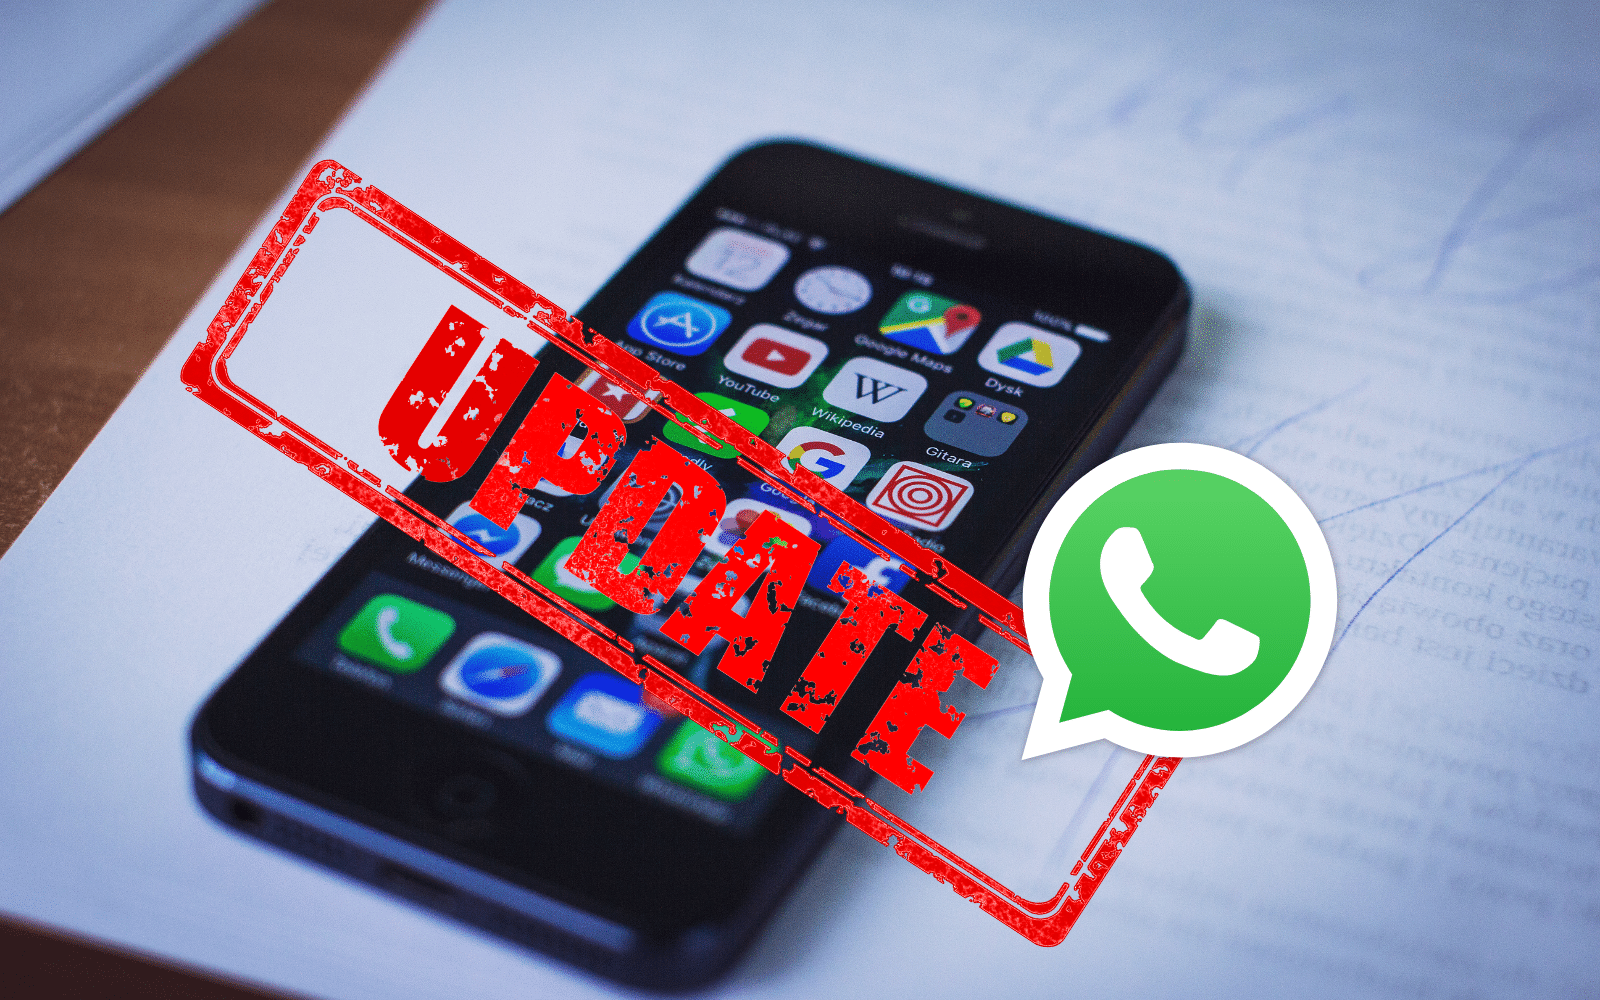 WhatsApp support is going away for some older iPhones, OS update required for others - StuffSA